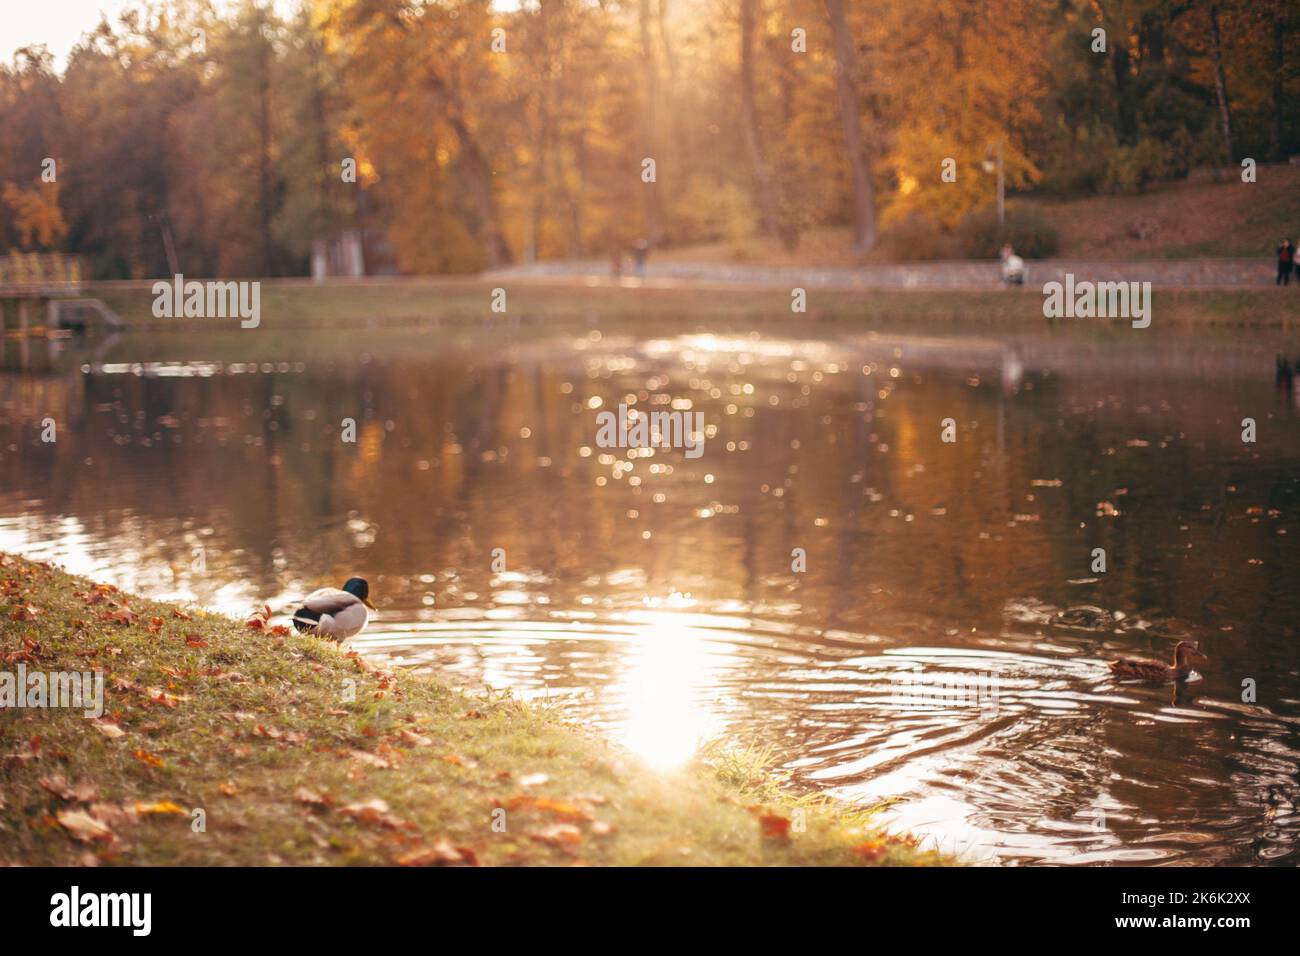 Scenic view of lake with ducks in park during sunny weather in autumn Stock Photo